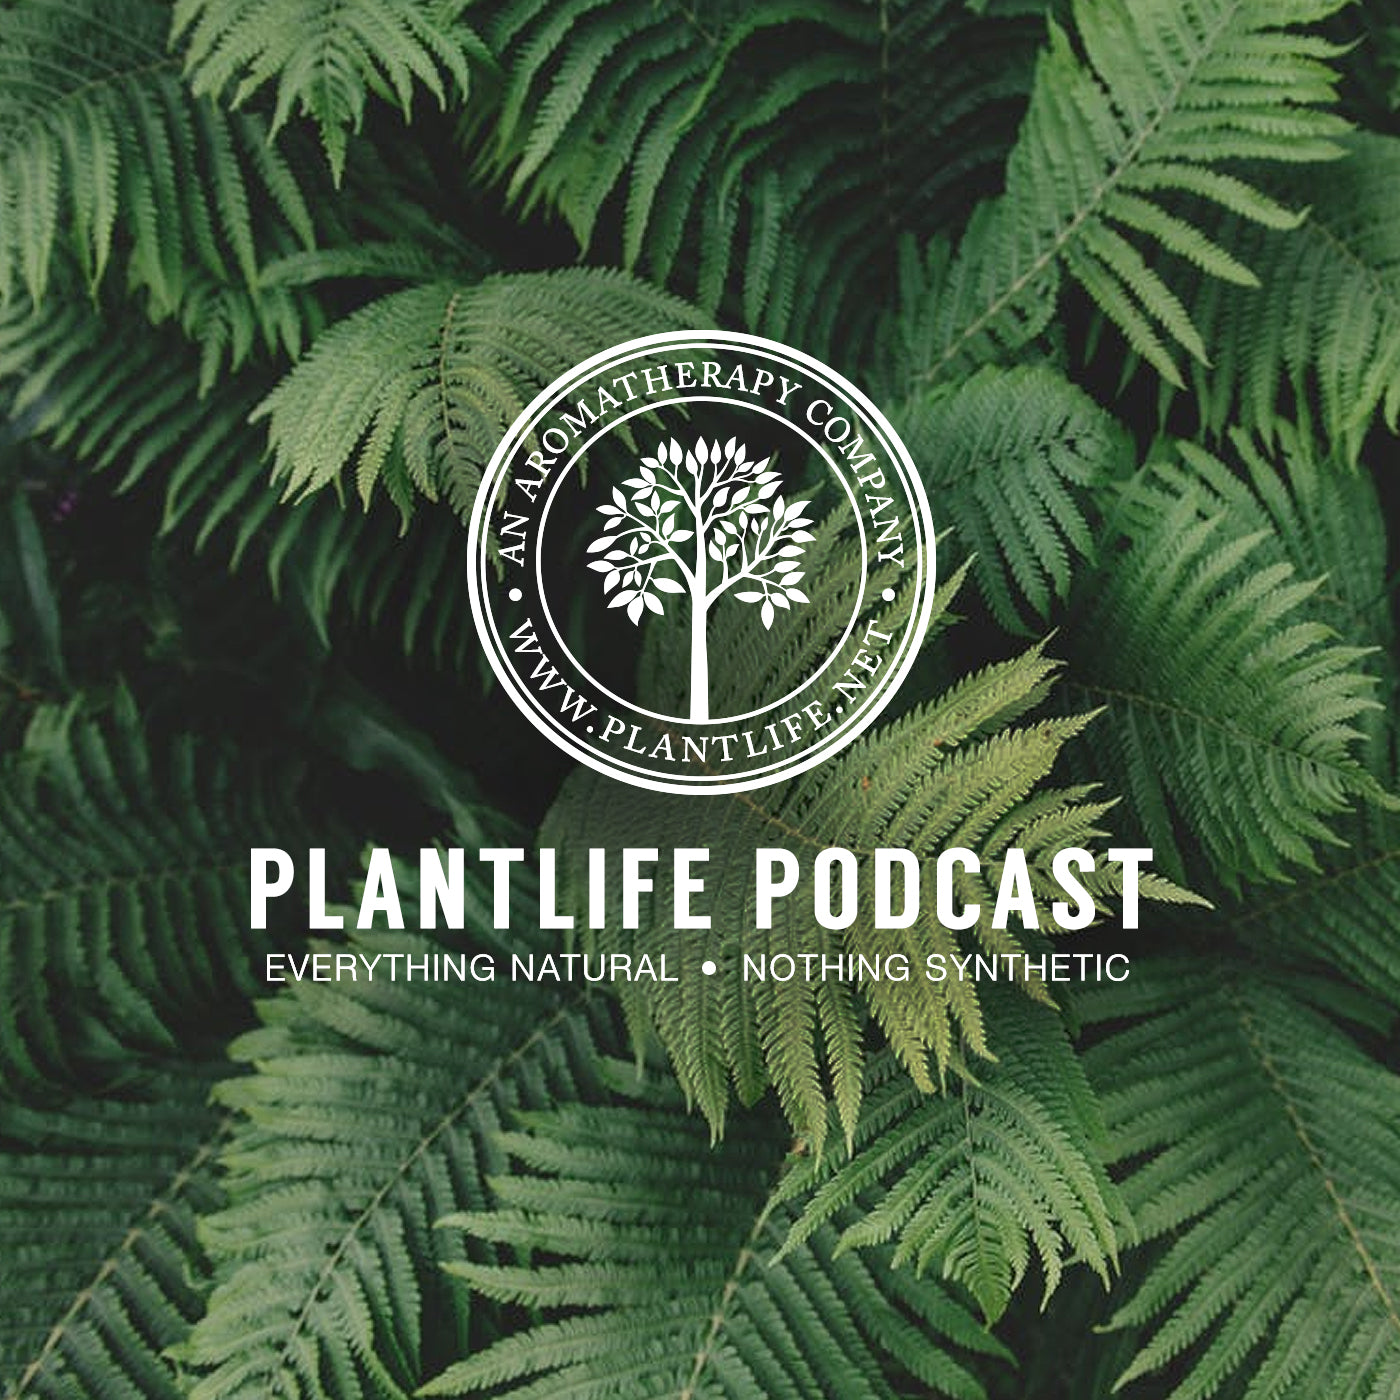 Podcast #2: About Plantlife